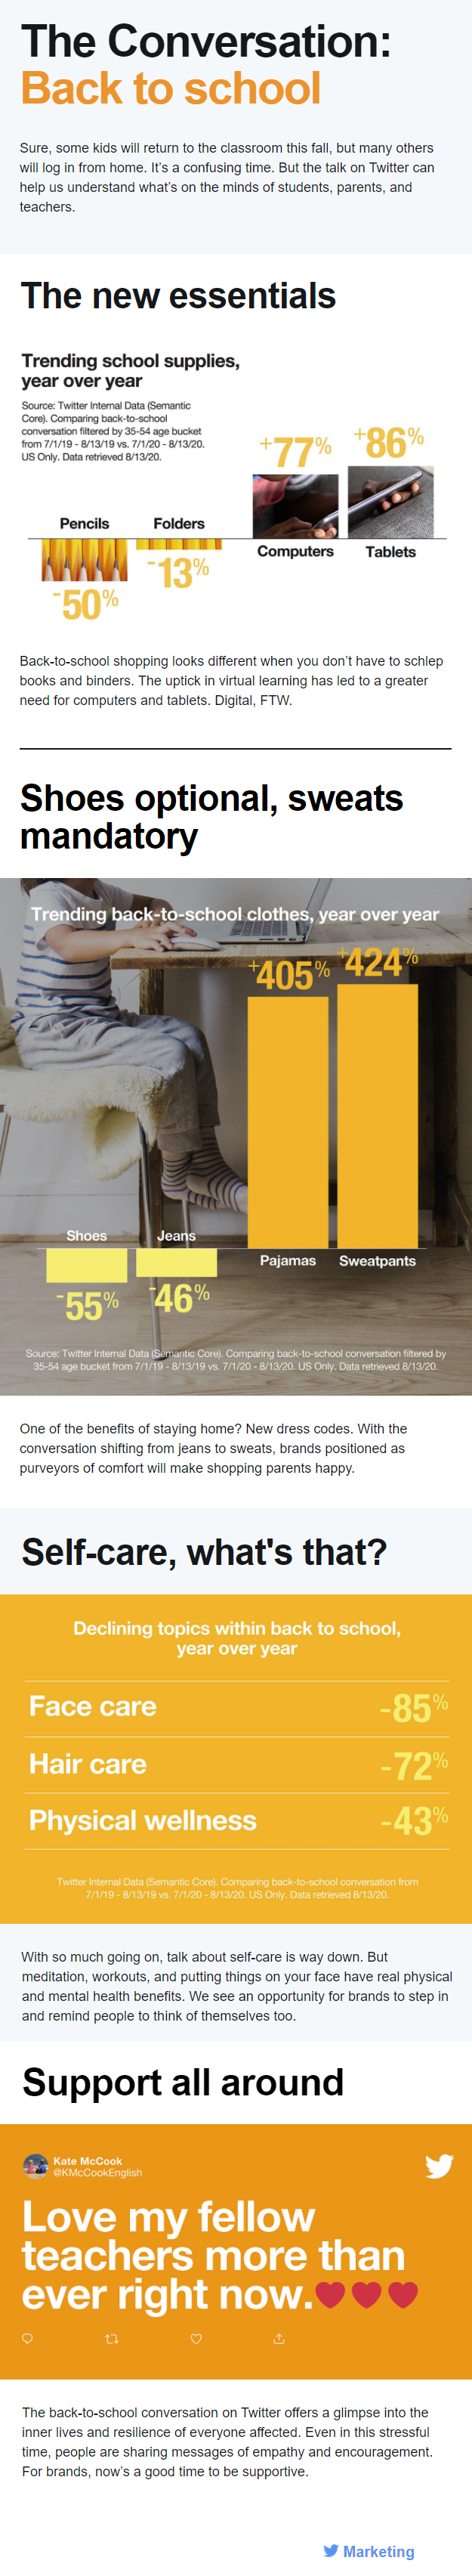 twitter shares new insights into back to school discussion trends infographic